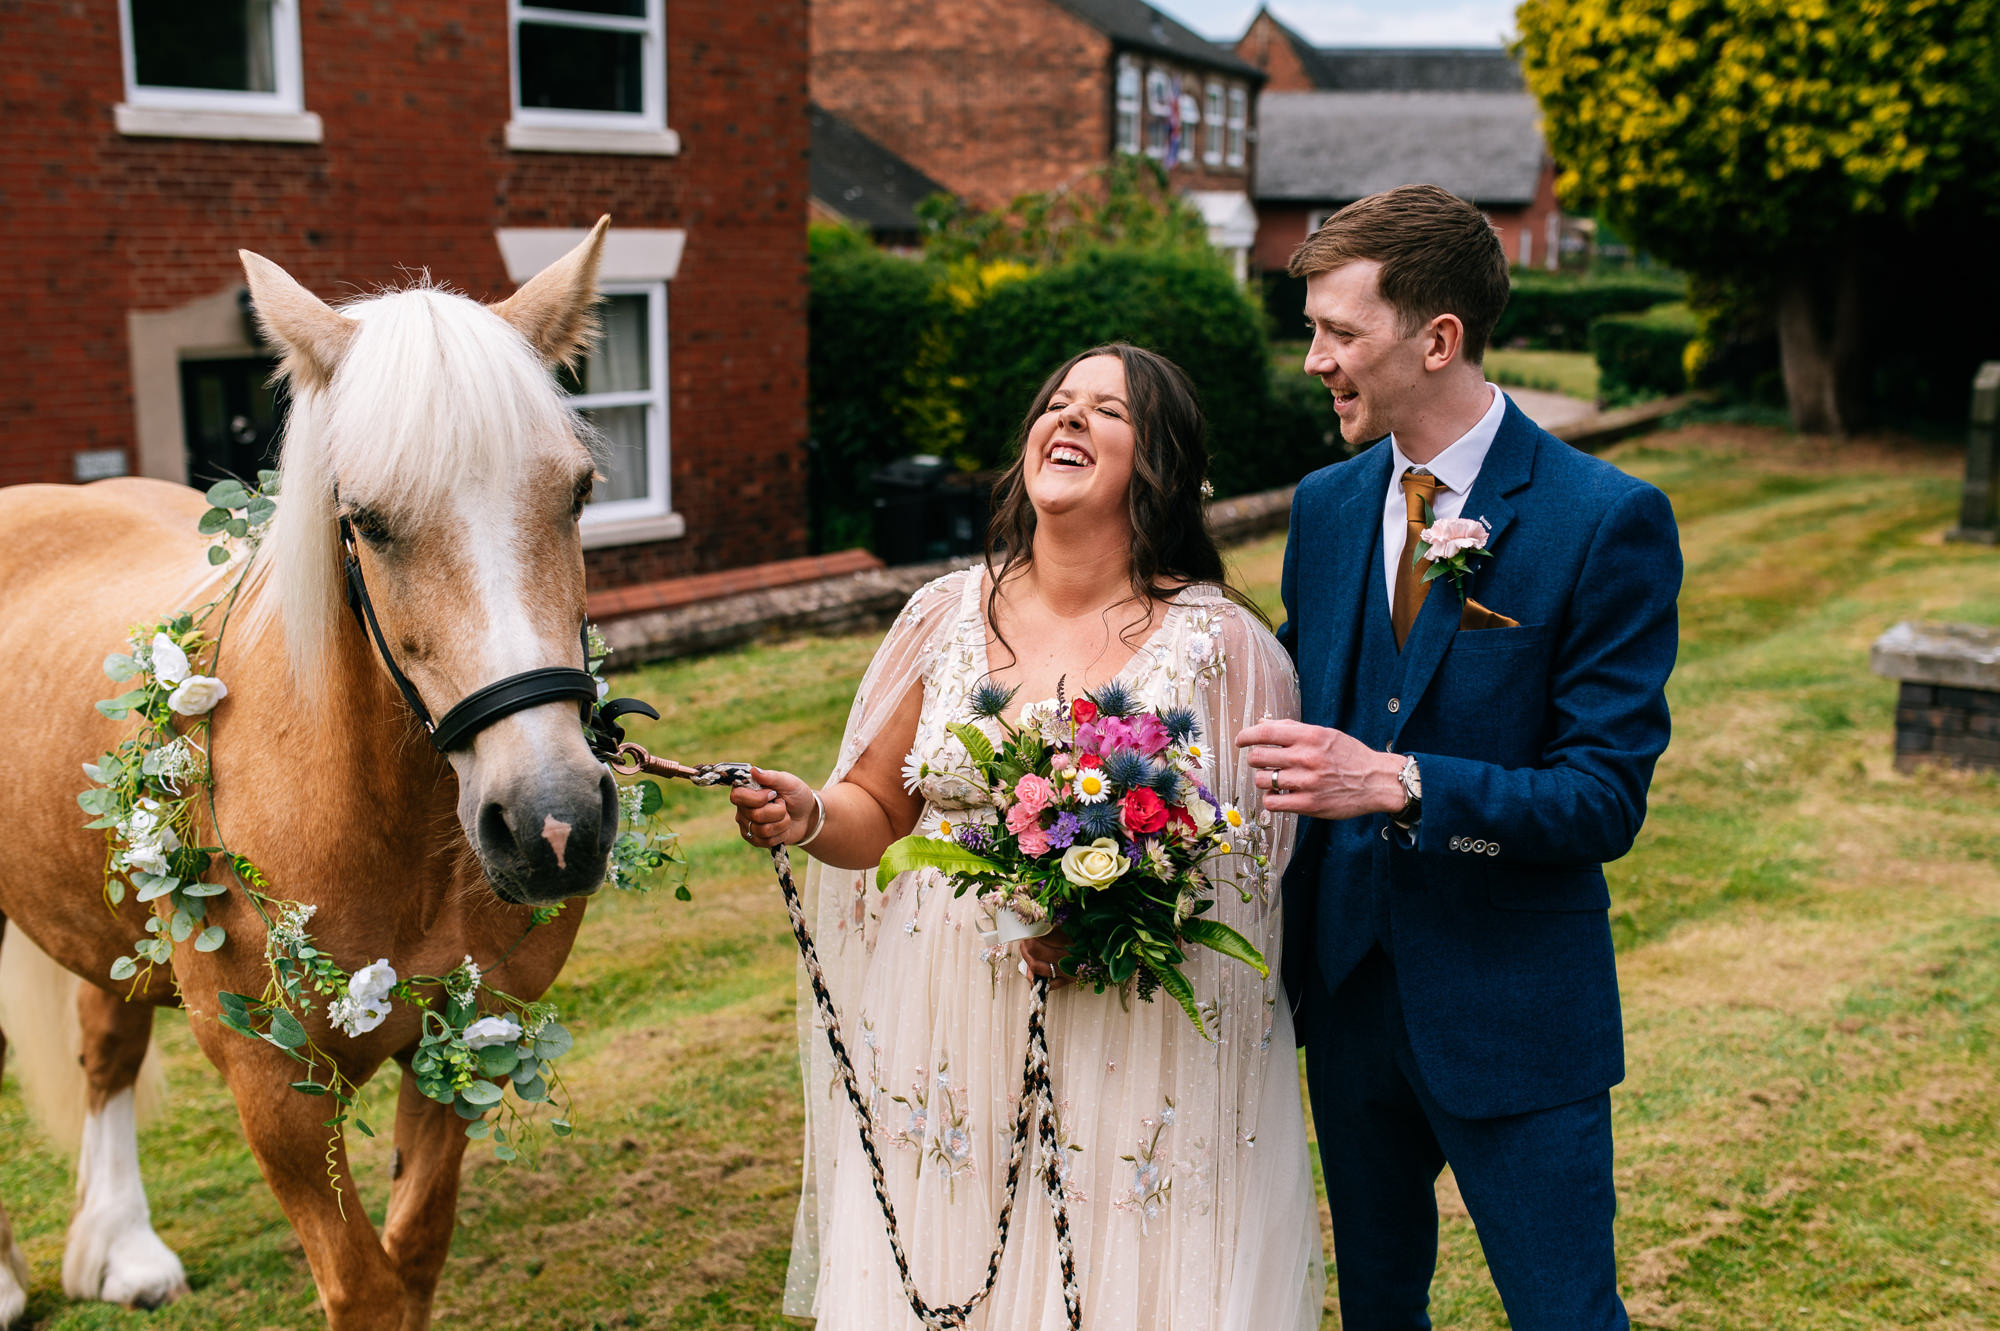 newlyweds stood together having photos with the brides horse